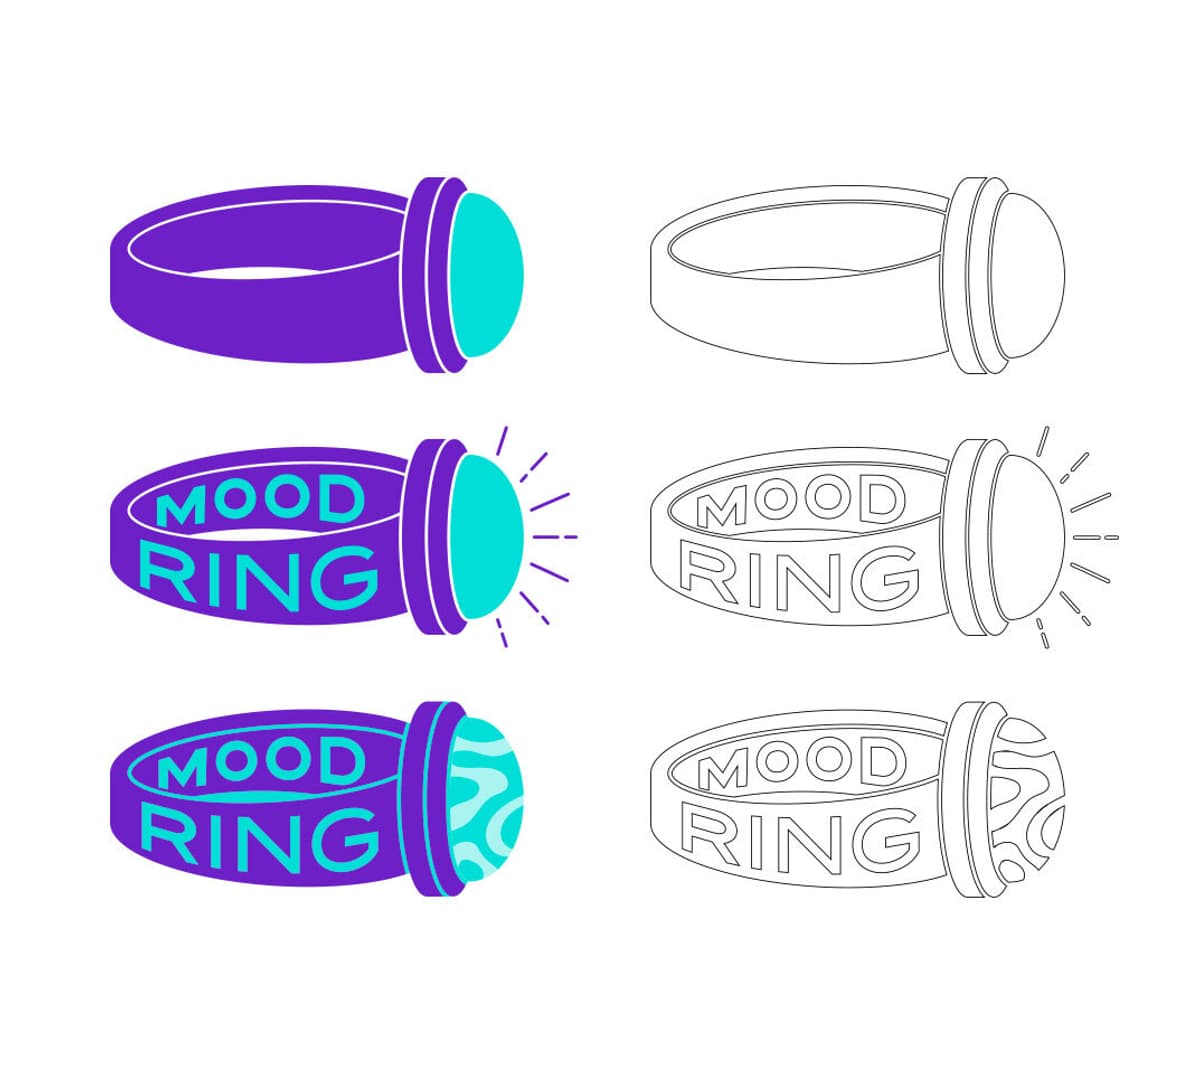 The progression of the first Mood Ring logo to the final logo.